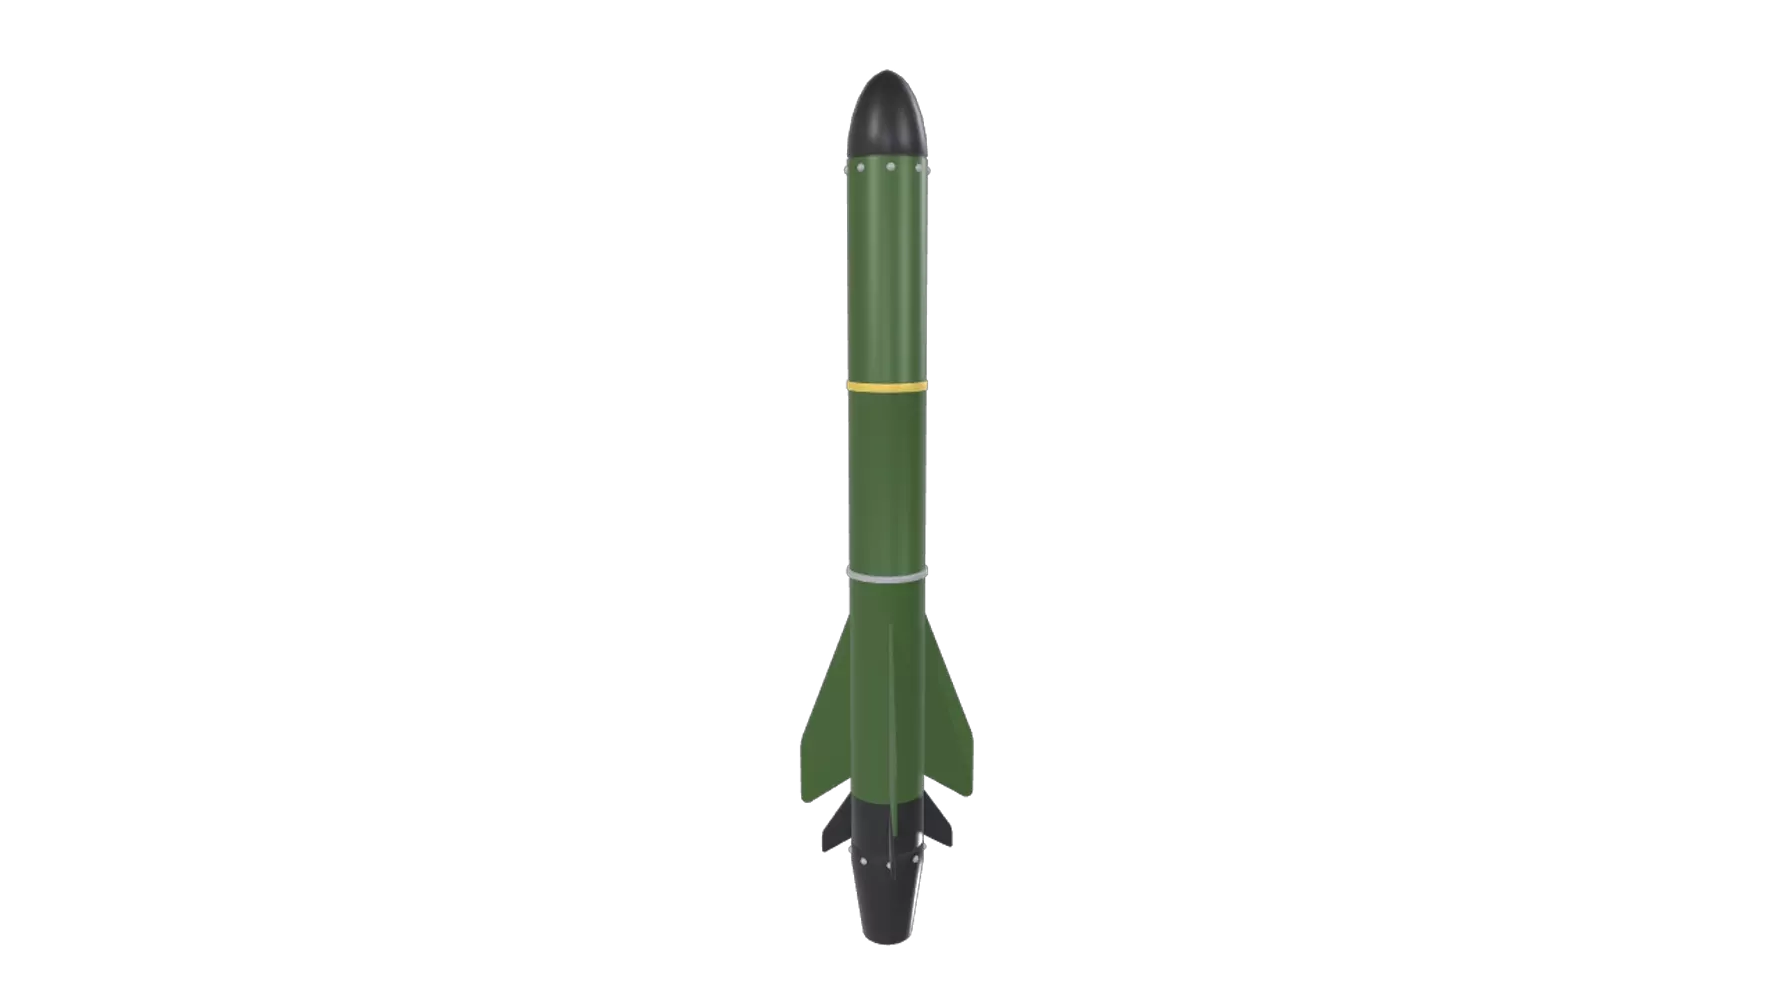 Missile 3D Graphic